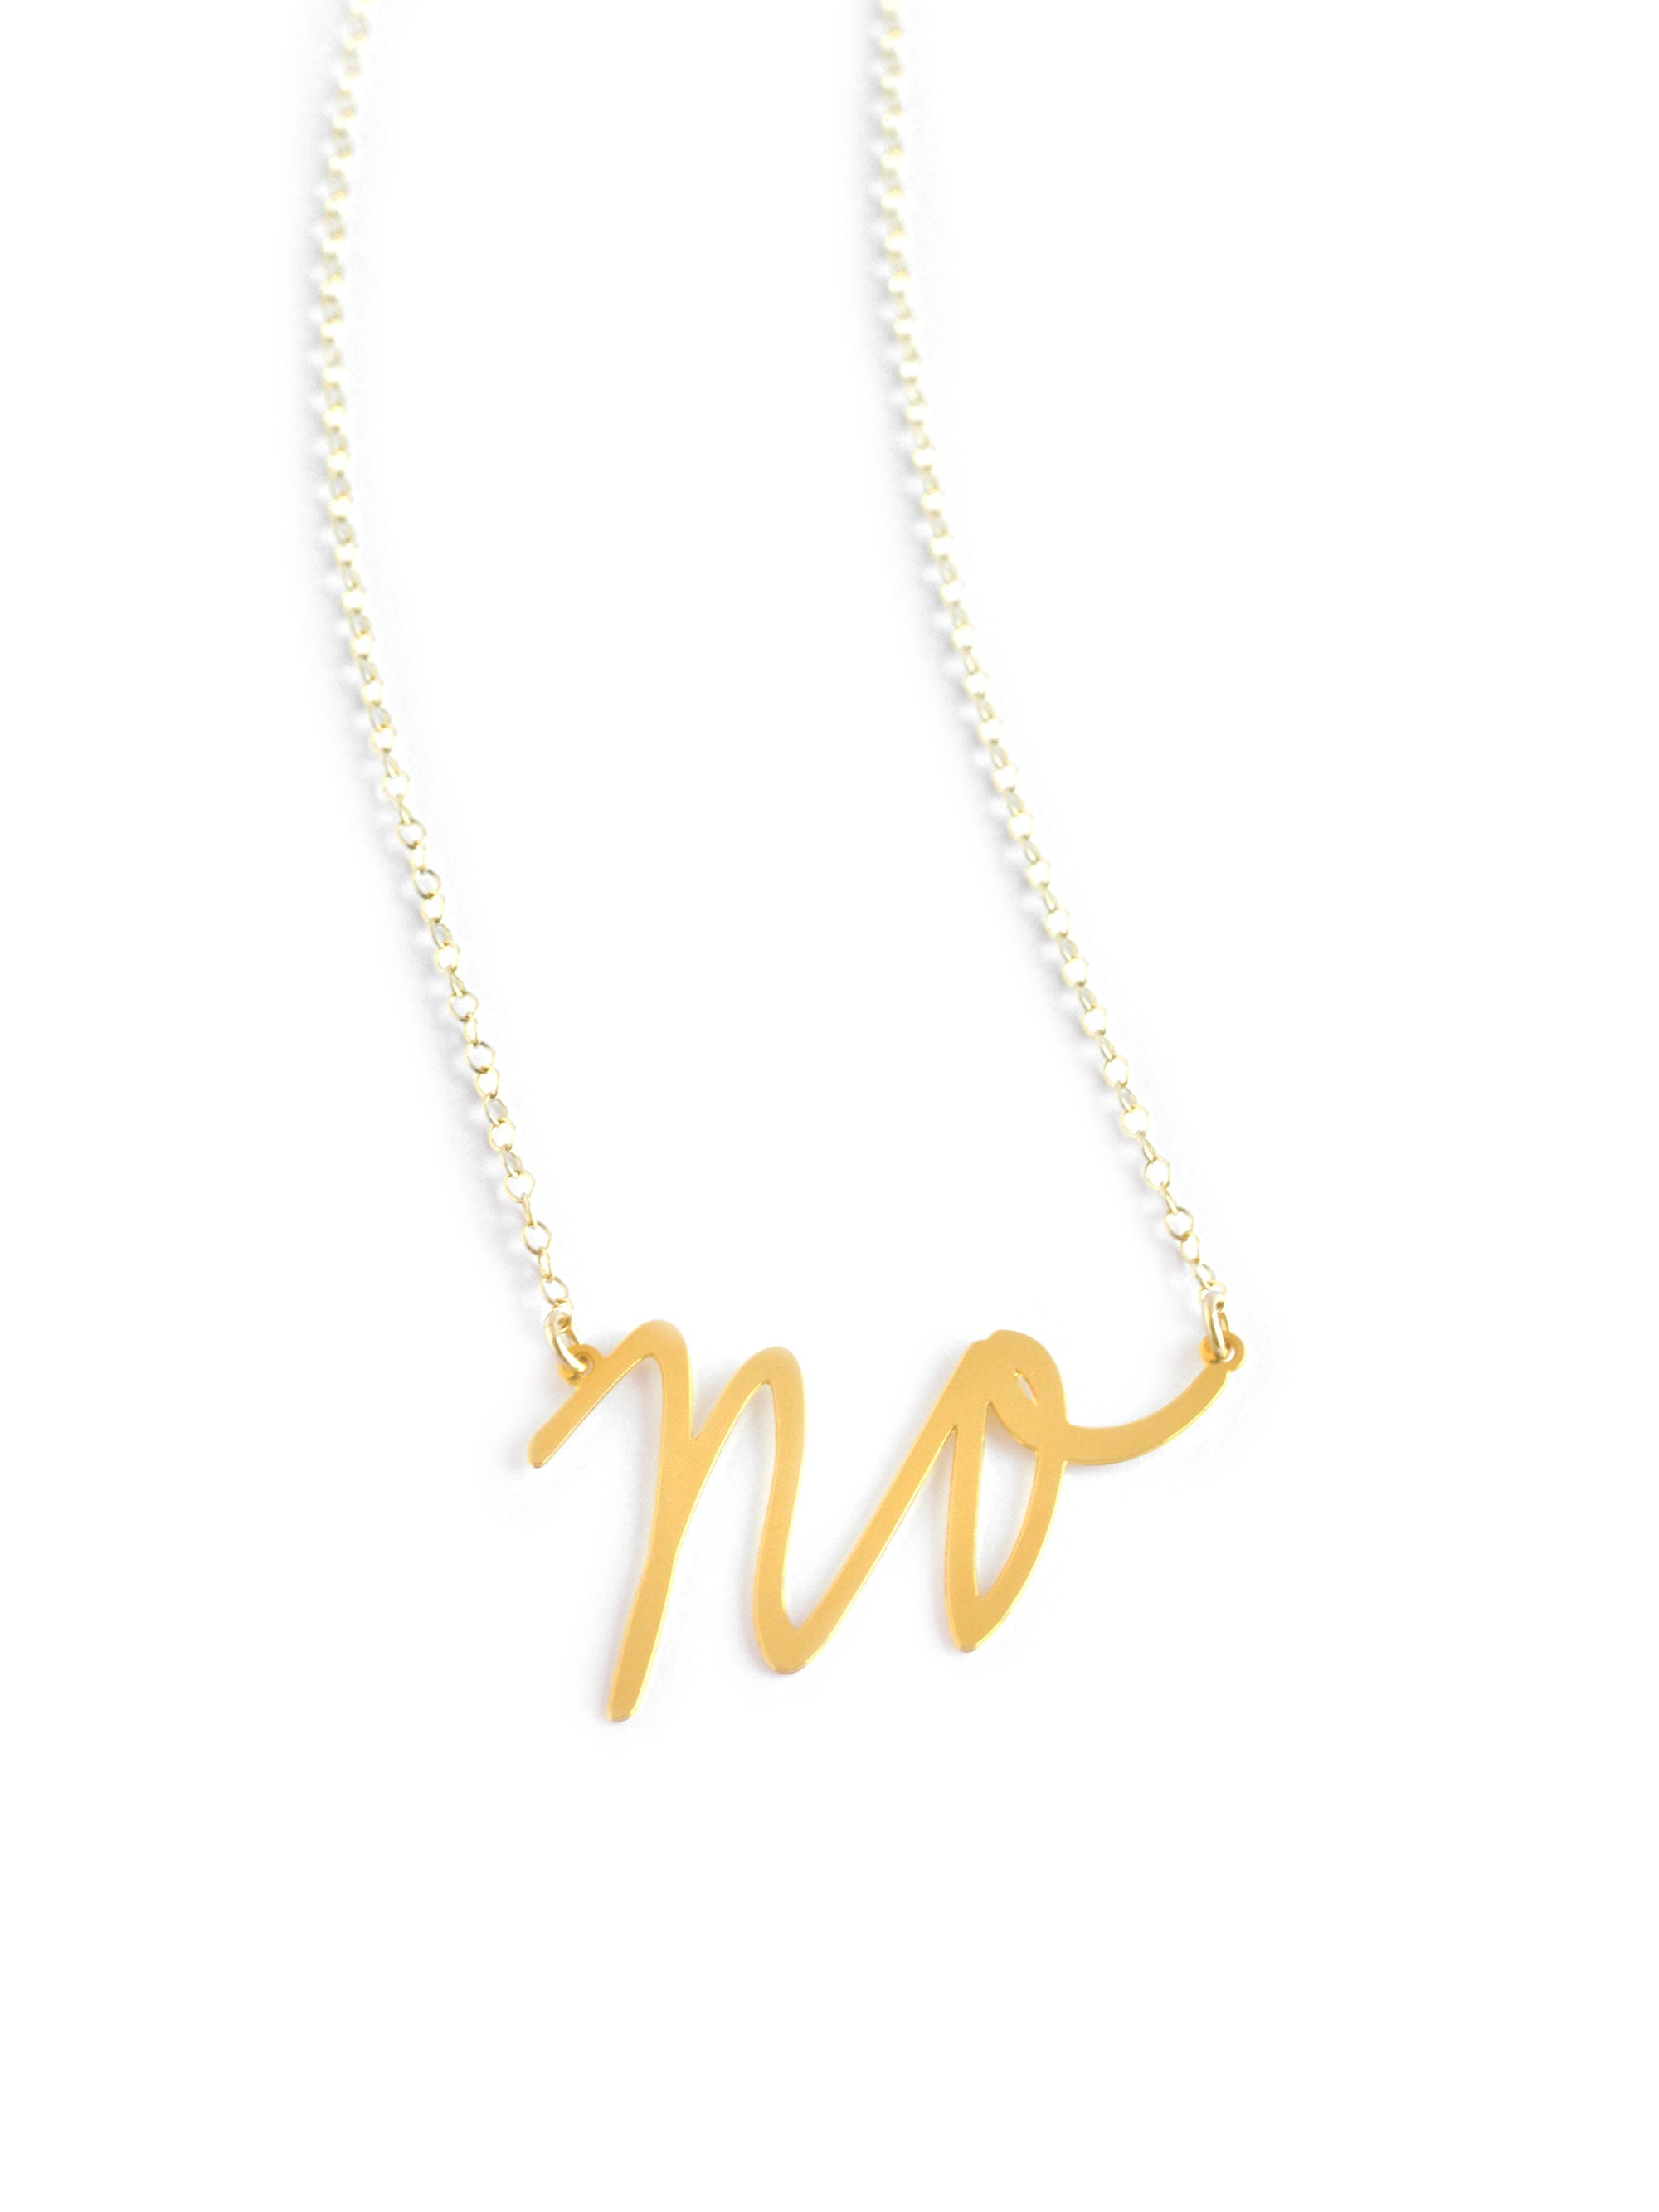 No Necklace - High Quality, Affordable, Hand Written, Self Love, Mantra Word Necklace - Available in Gold and Silver - Small and Large Sizes - Made in USA - Brevity Jewelry